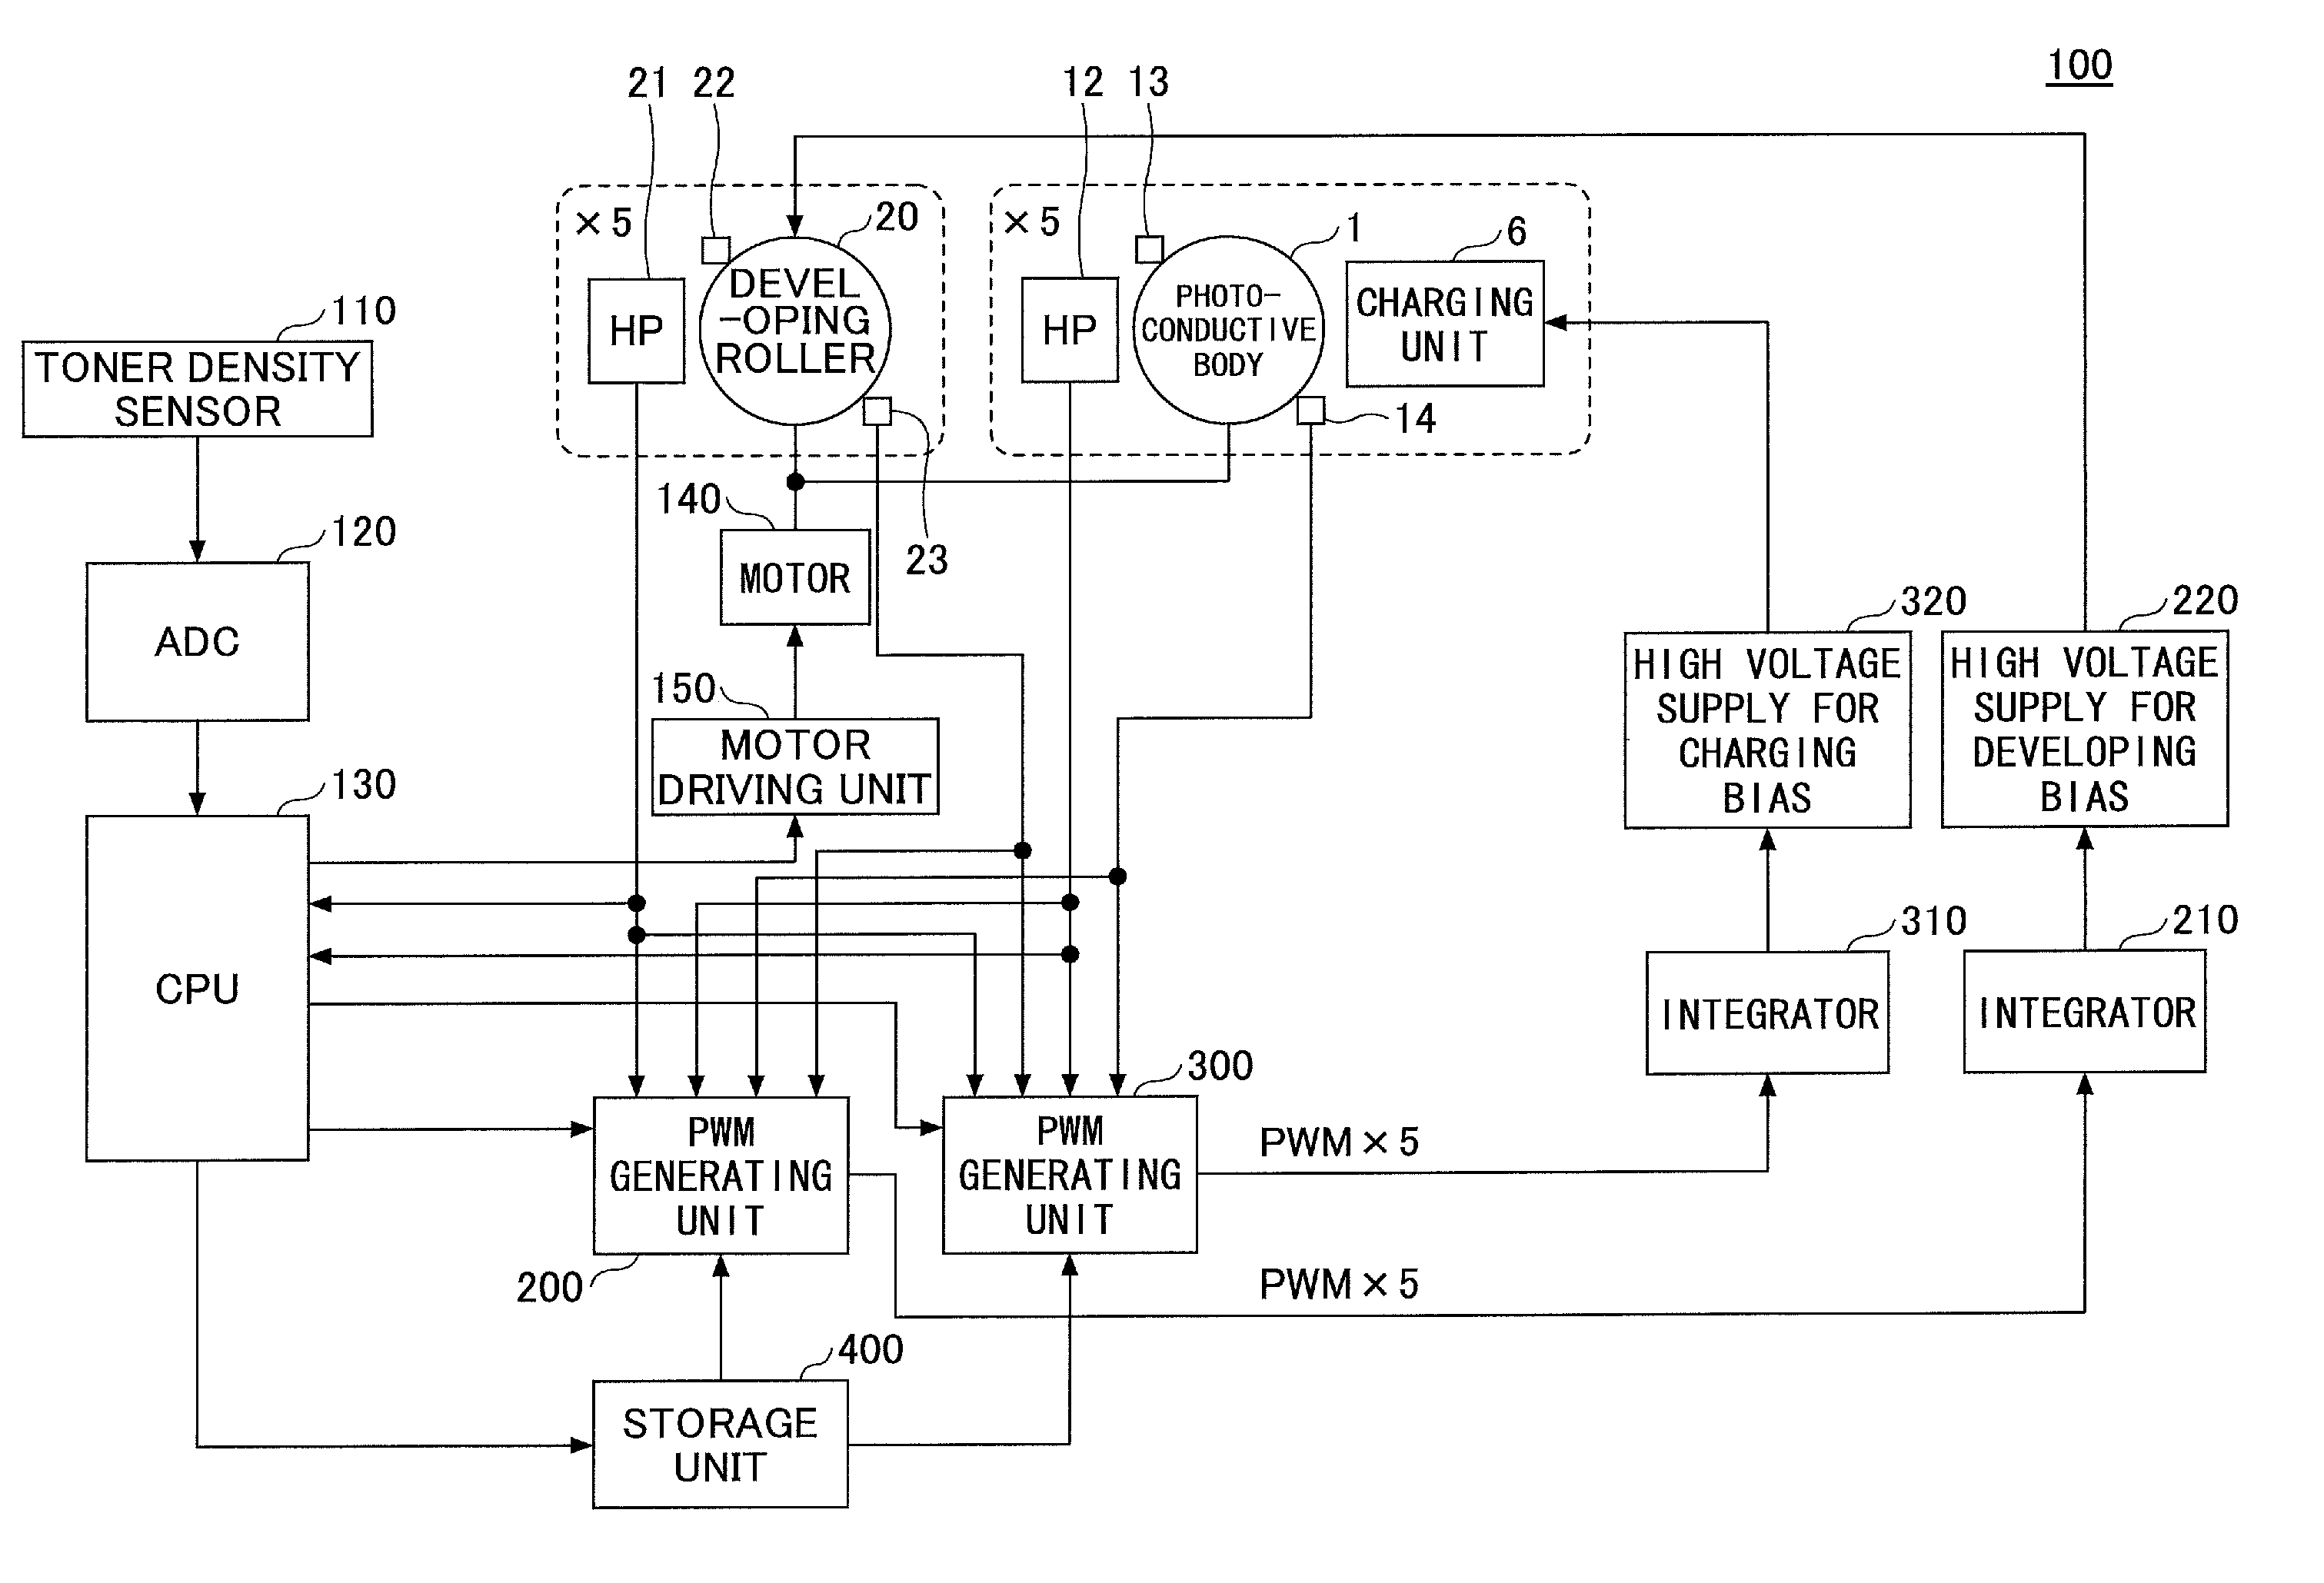 PWM generating unit, image forming apparatus, and image forming method